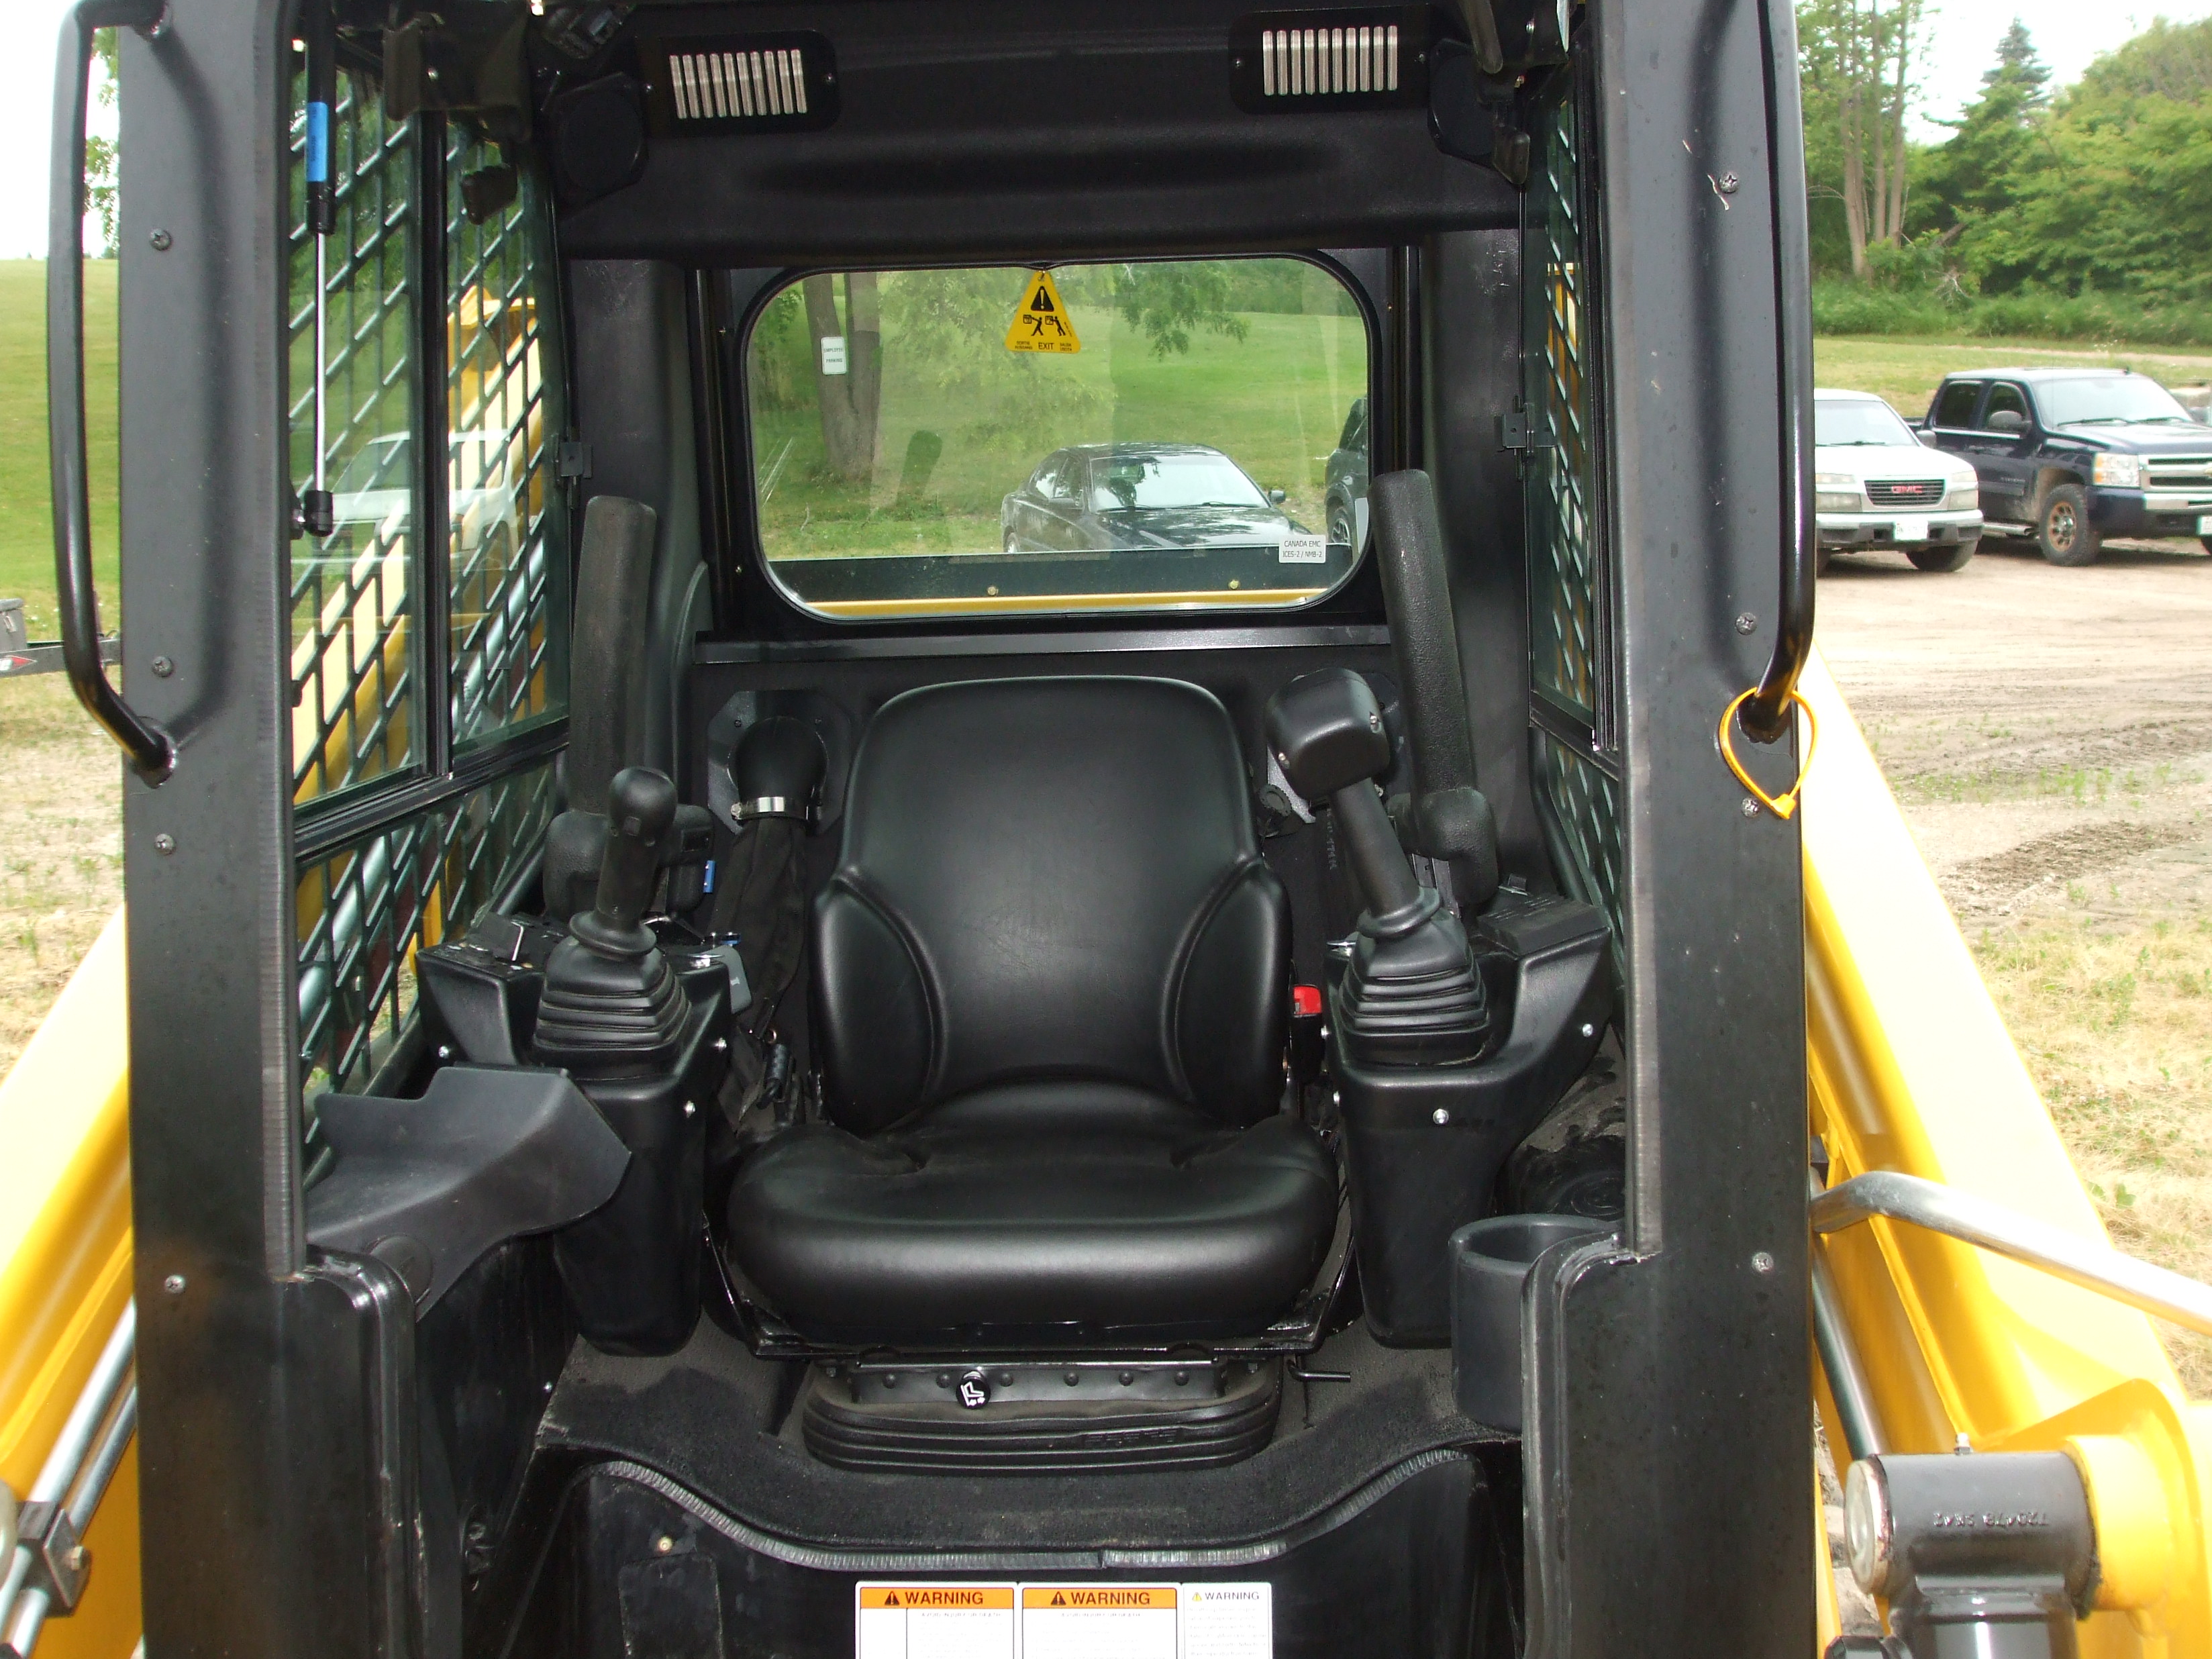 2021 Gehl RT215 Skid Steer Loader for sale in Mildmay, ON | IronSearch